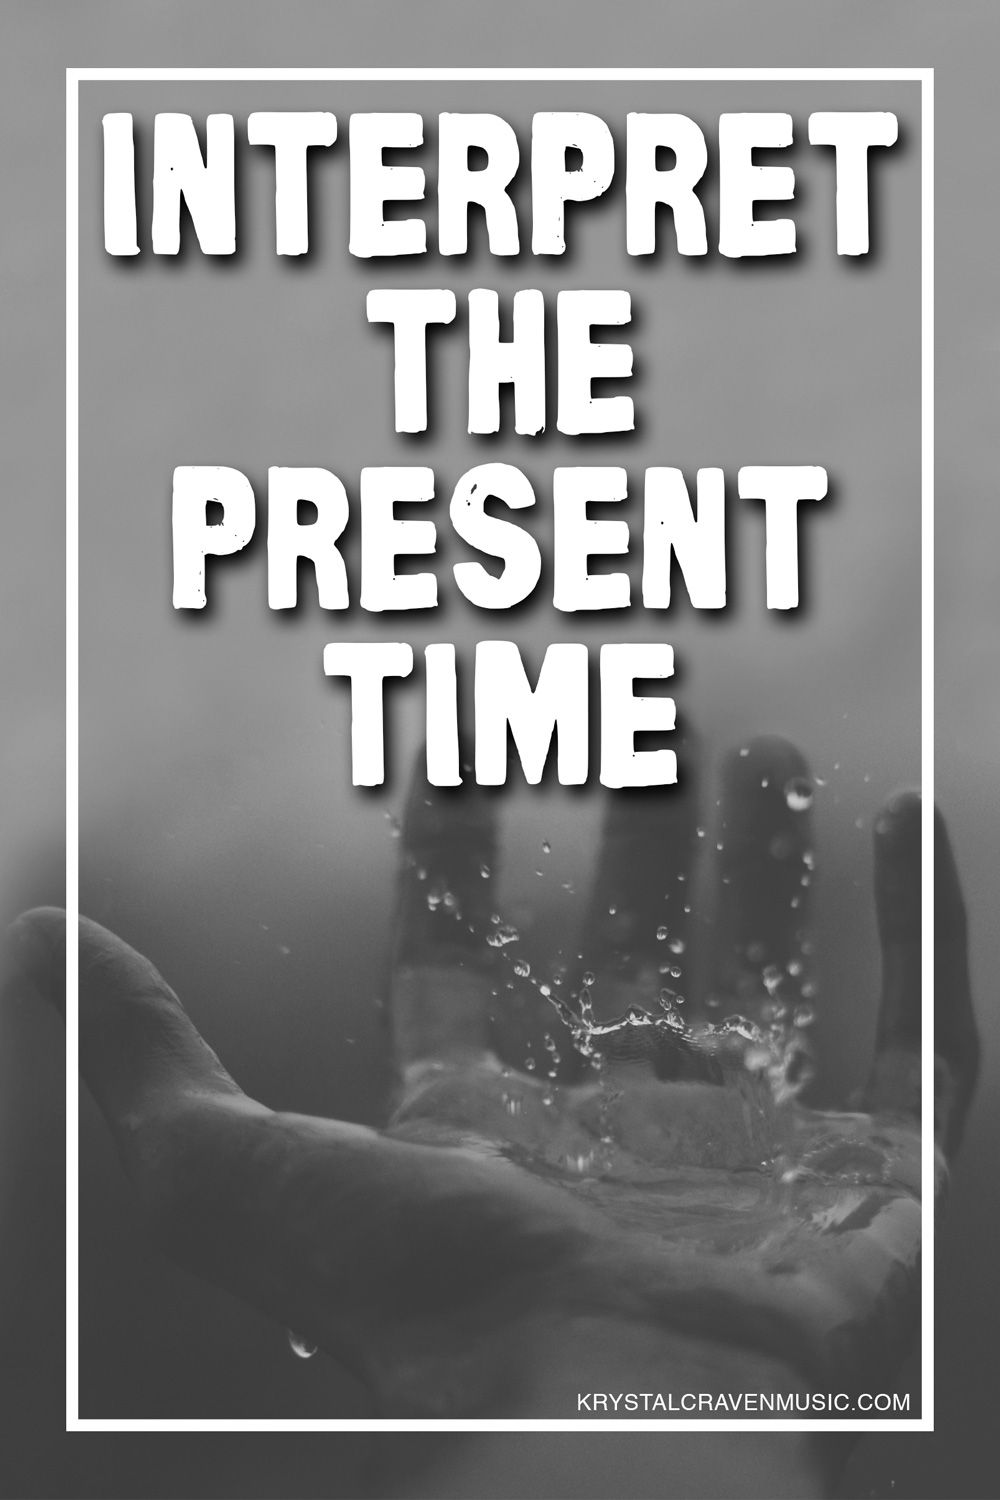 The title text "Interpret The Present Time" over a hand palm up and with fingers lightly curled upward with water splashing from the palm.